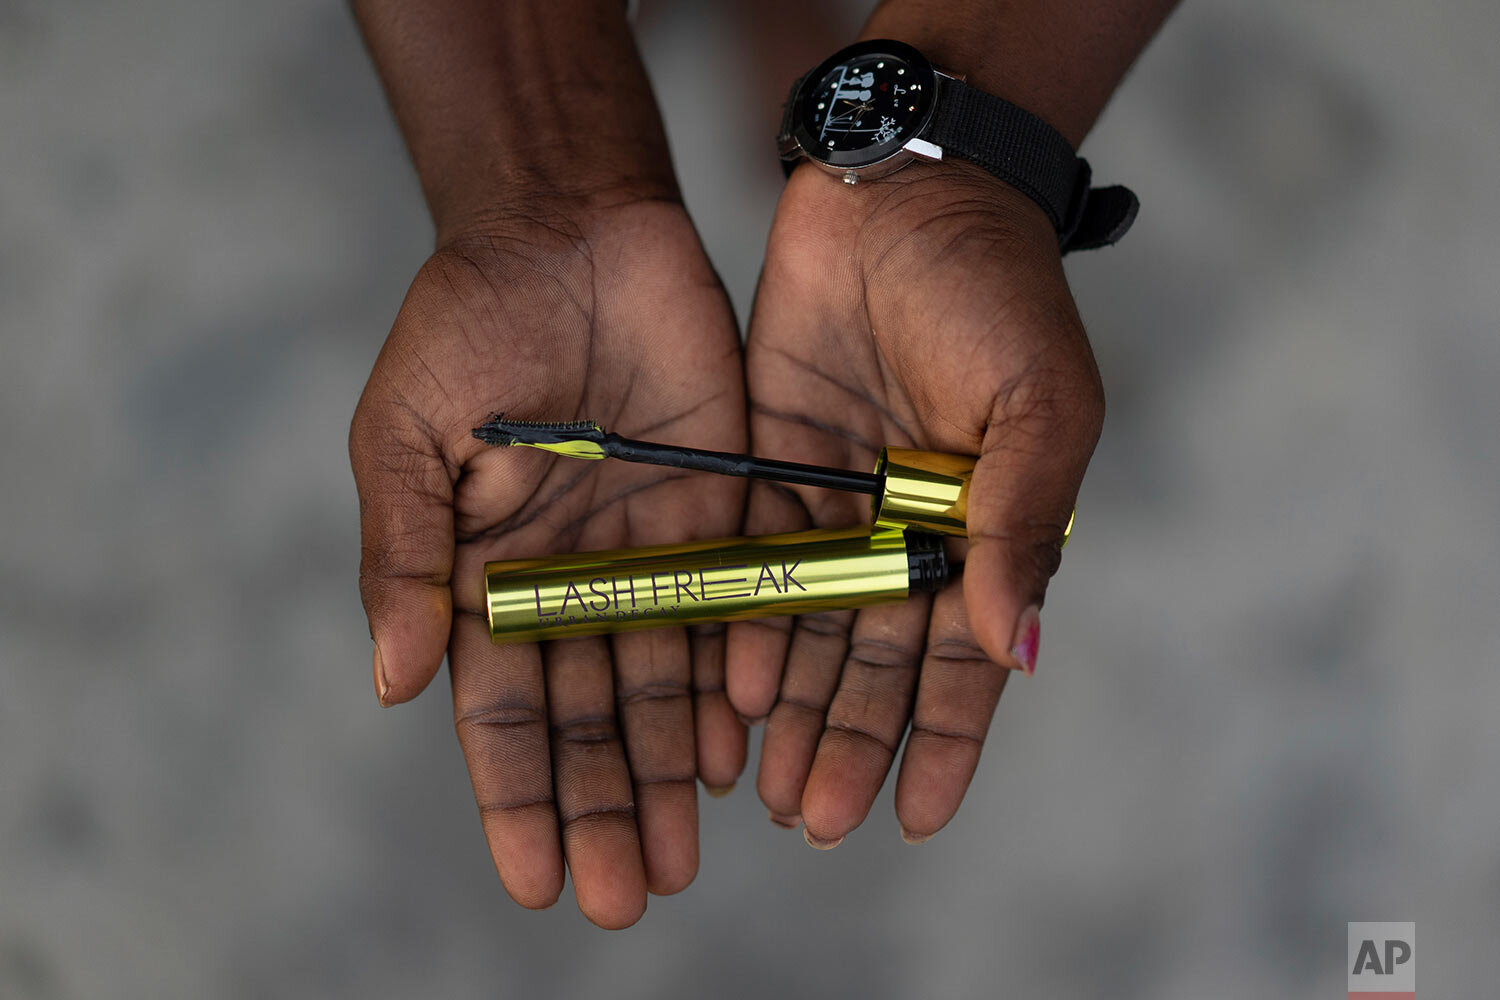  A 27-year-old woman poses with a mascara popular with Gen Z buyers in Malaysia, on Wednesday, Nov. 11, 2020. She quit school at 14 and went to work on the plantation as all the women before her had done. She said she never really saw any other life 